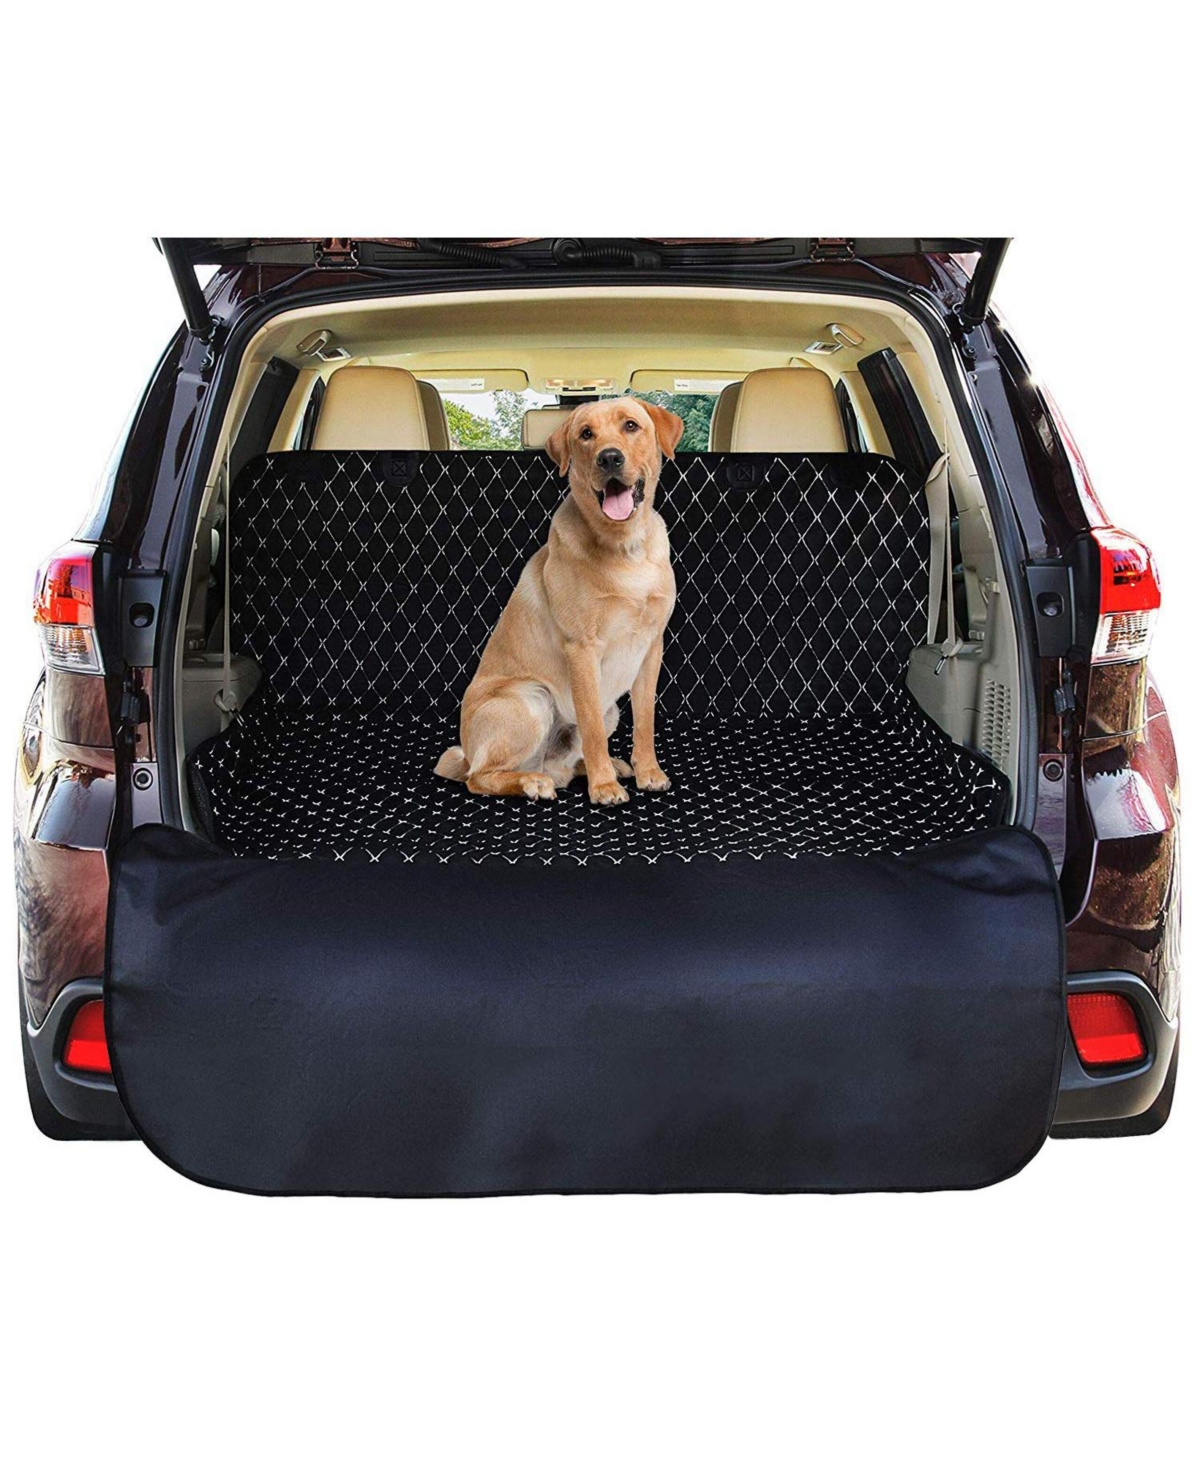 Cargo Liner, Seat Cover for Dogs, Waterproof Dog Seat Cover - Black